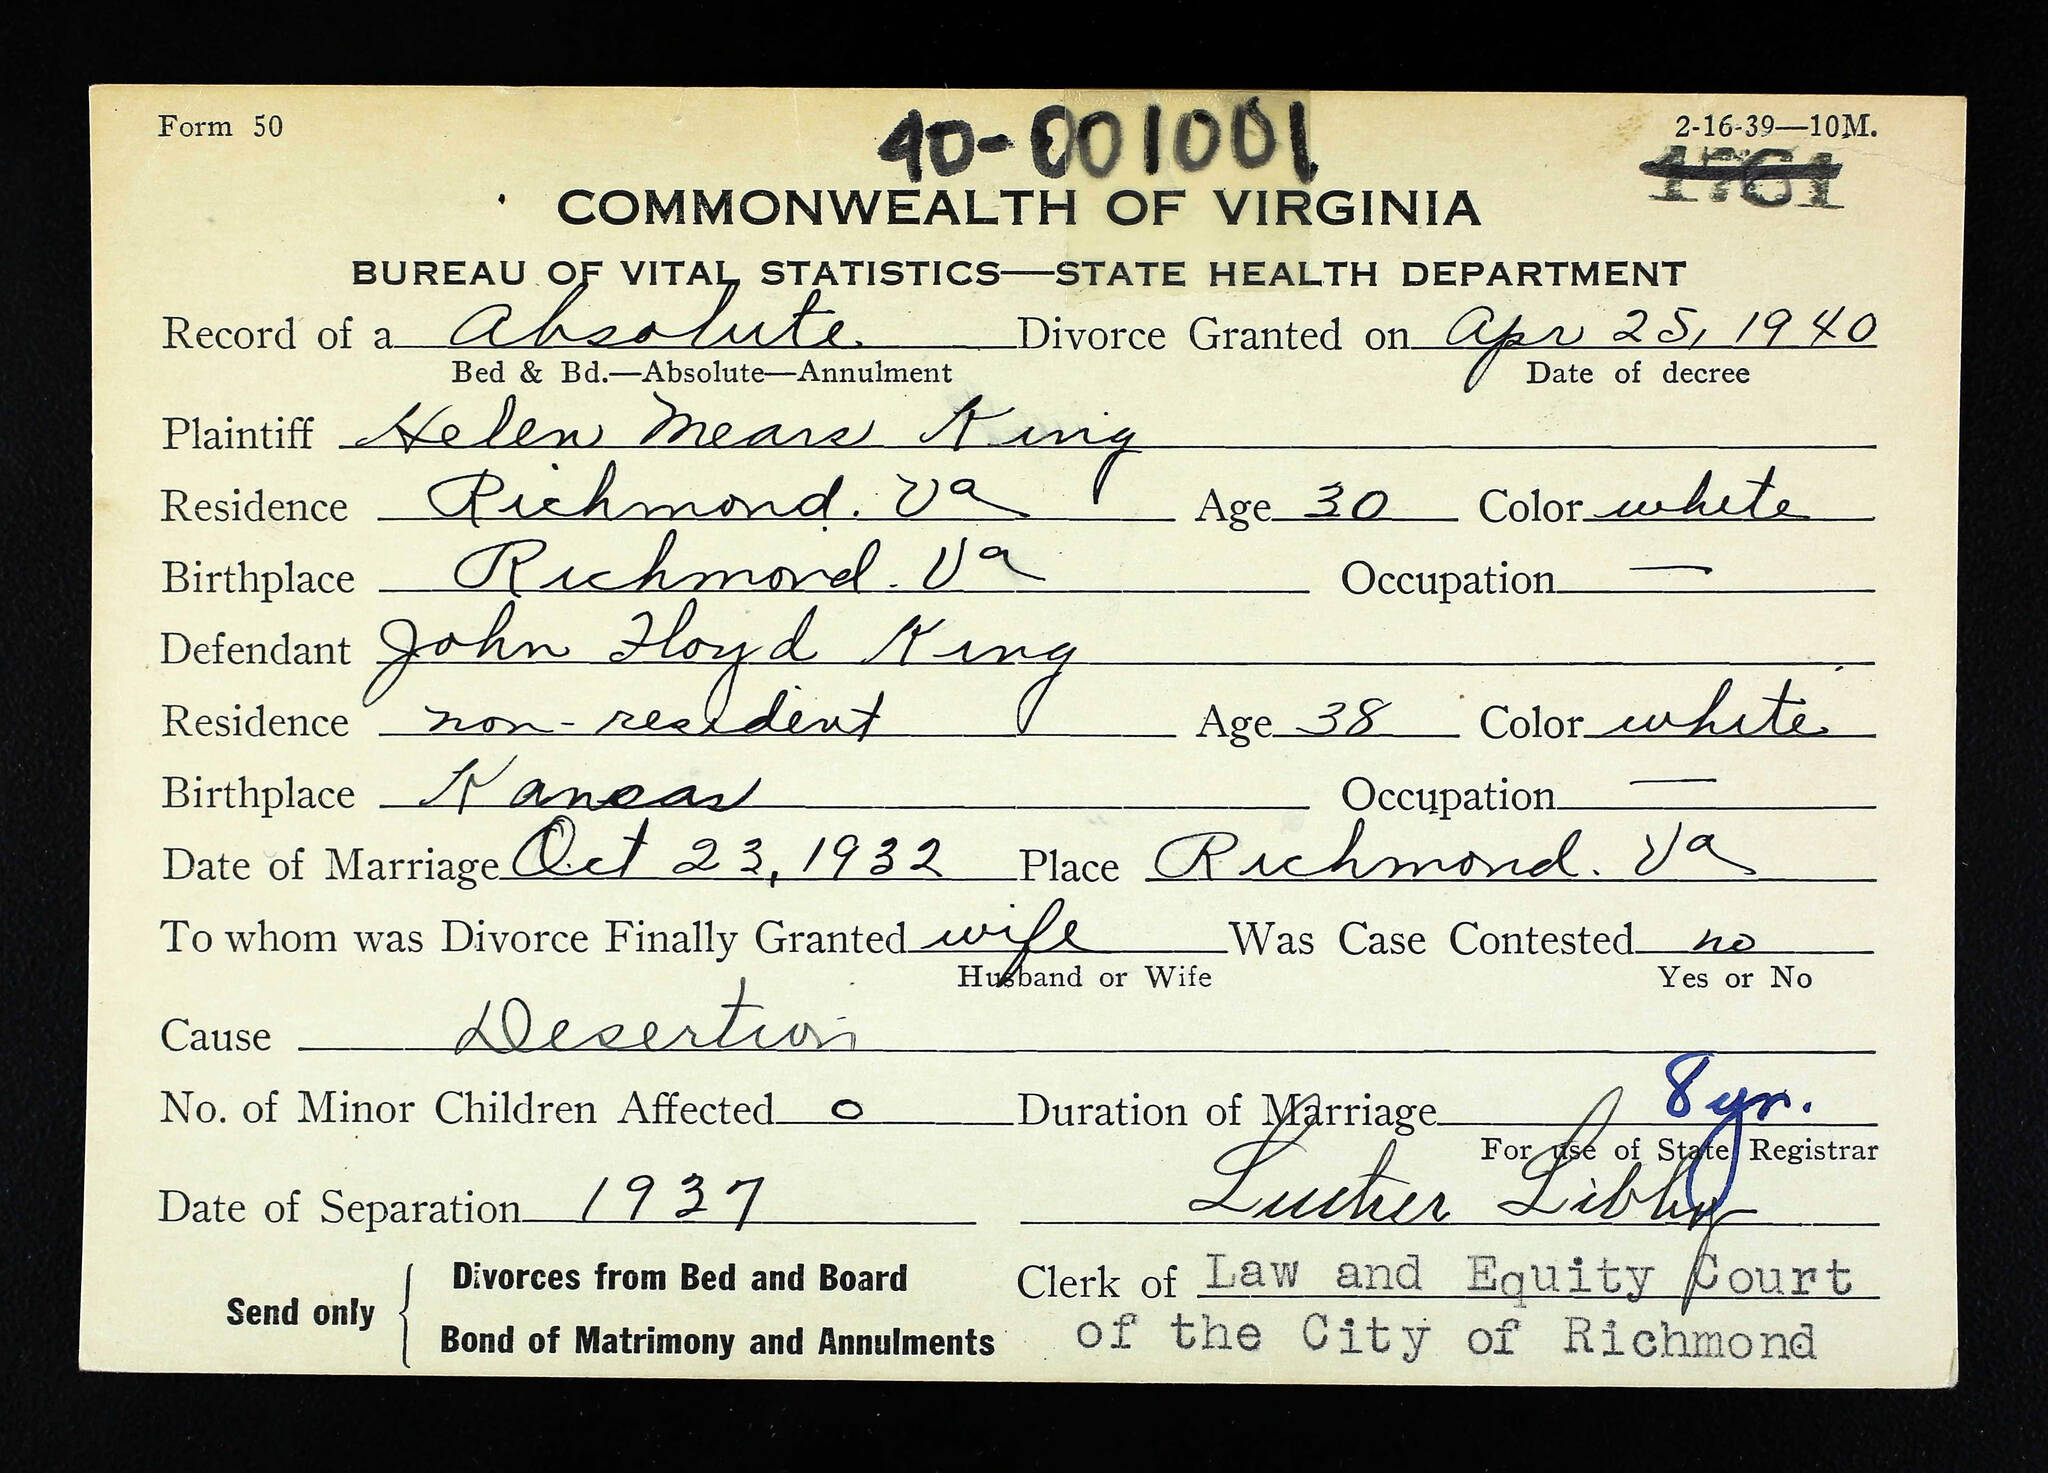 This April 1940 form from the Law and Equity Court in Richmond, Virginia, lays out the basic details of Helen Mears King’s divorce from her husband, John Floyd King.